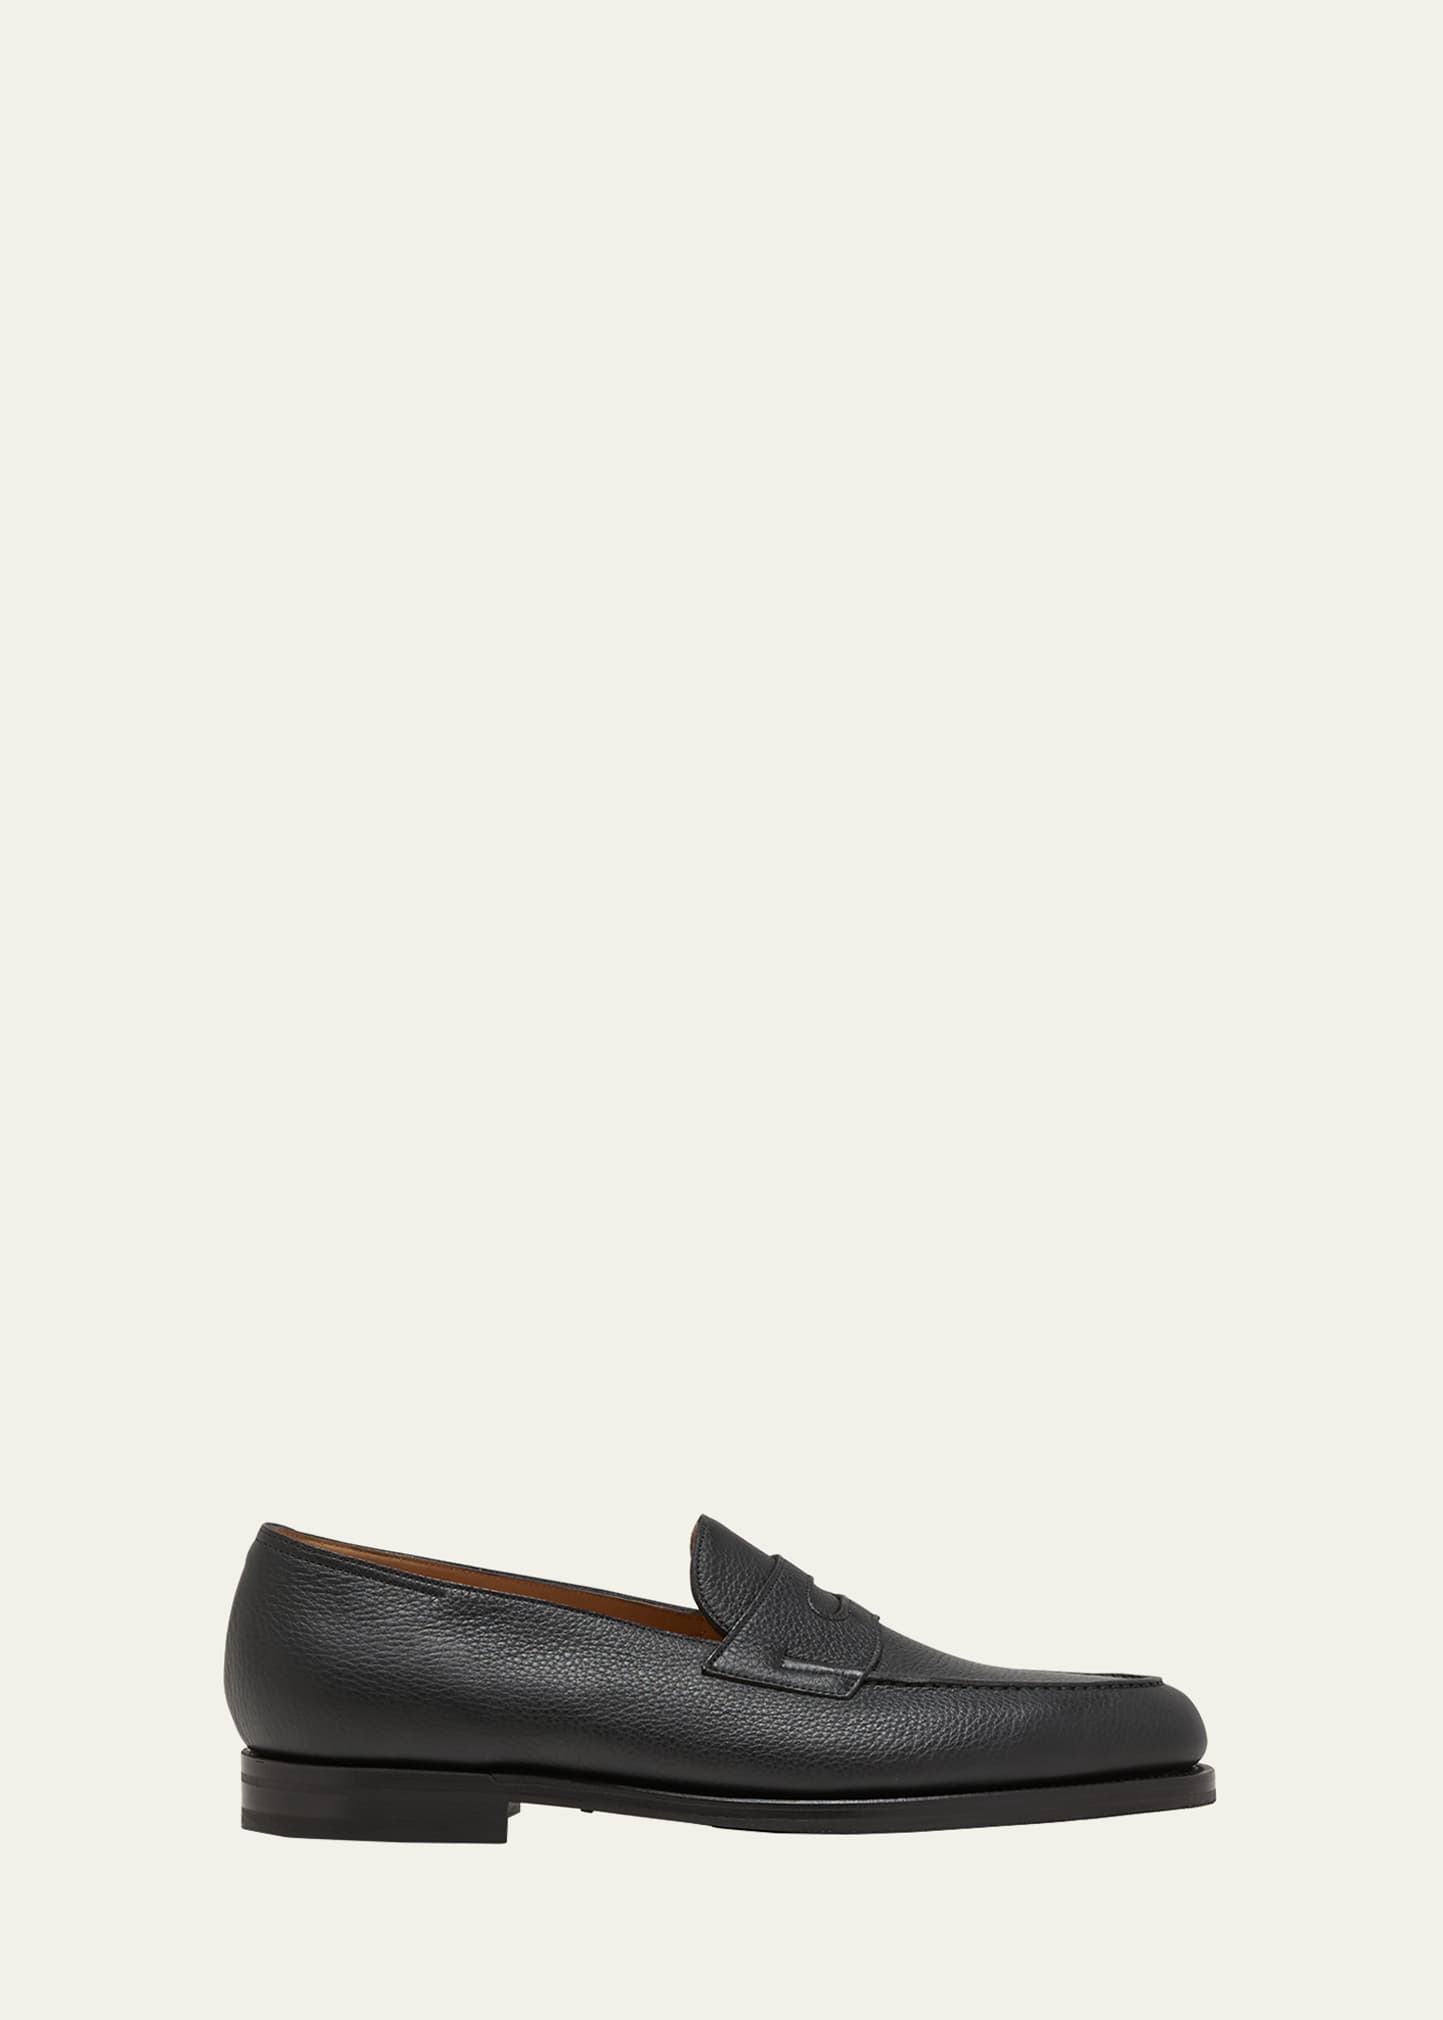 Men's Lopez Soft Grained Leather Penny Loafers